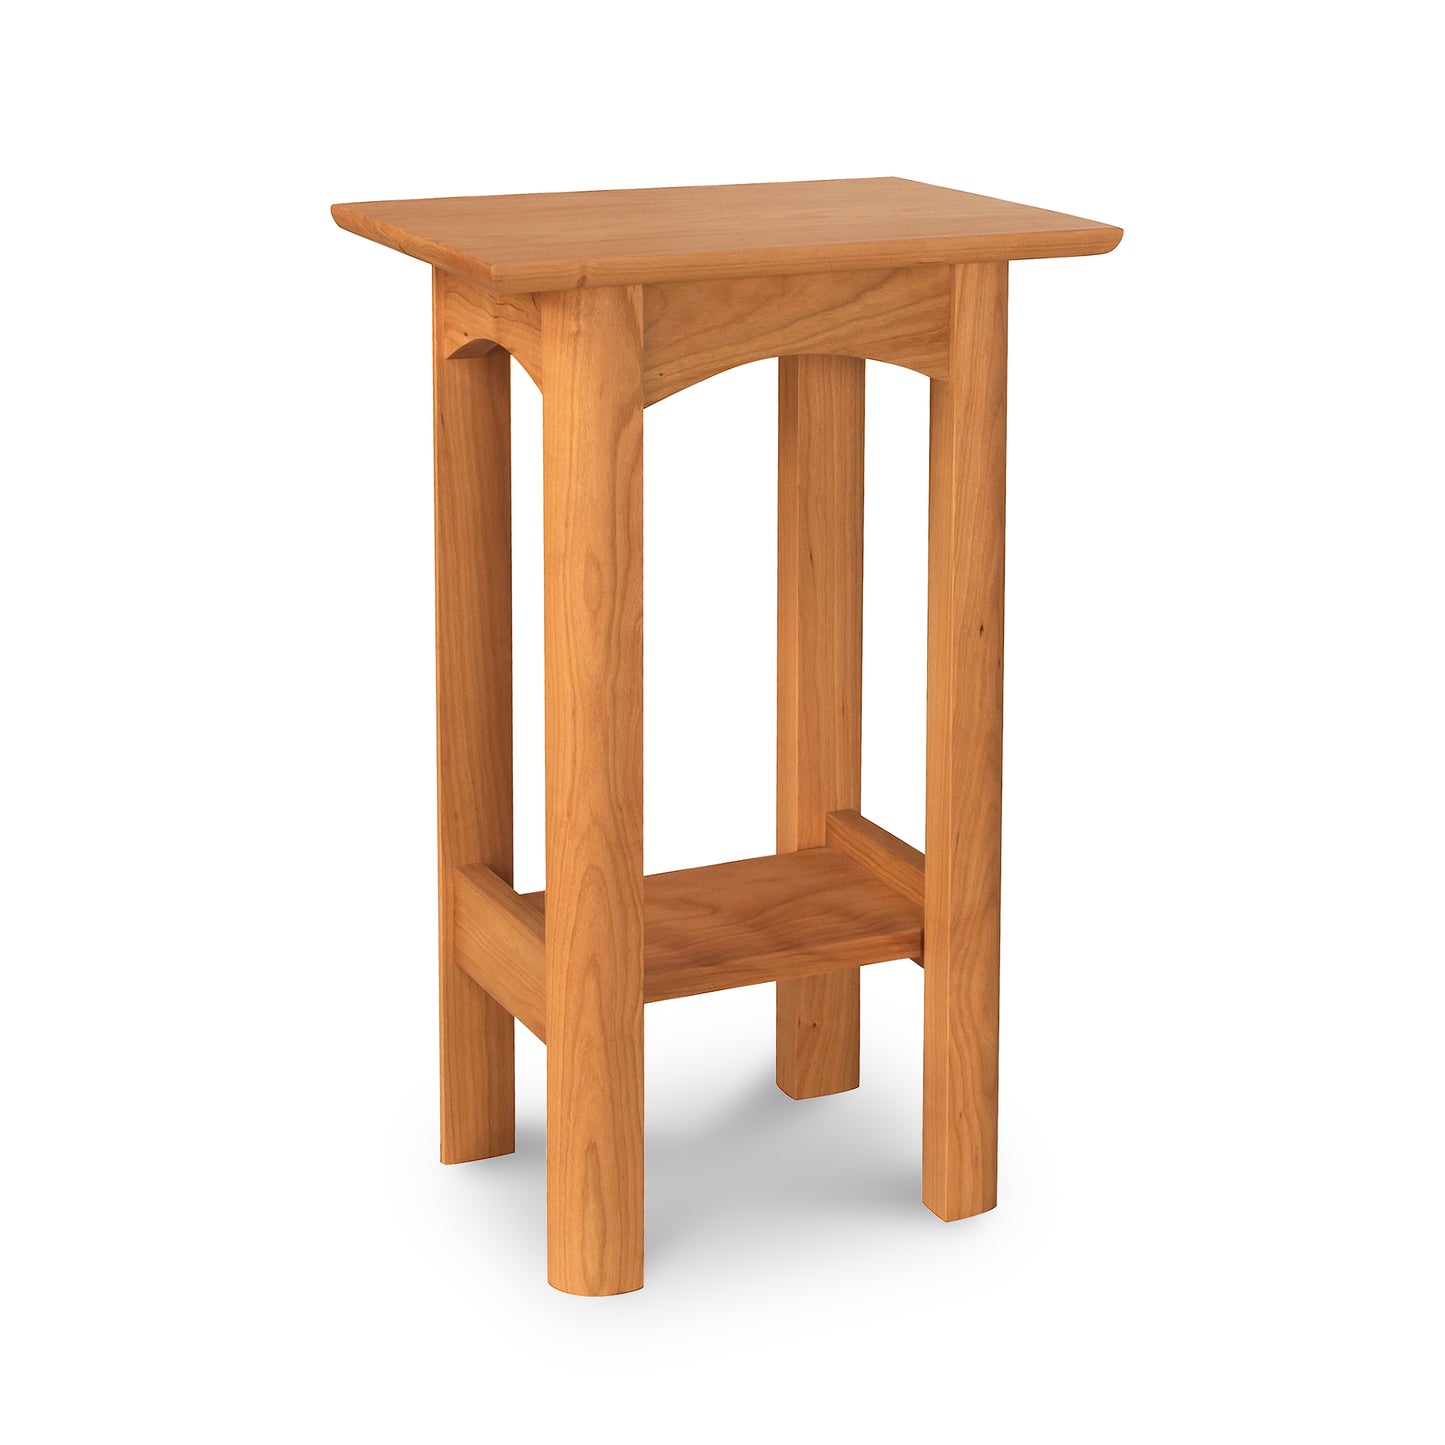 Vermont Furniture Designs Heartwood Shaker end table isolated on a white background.